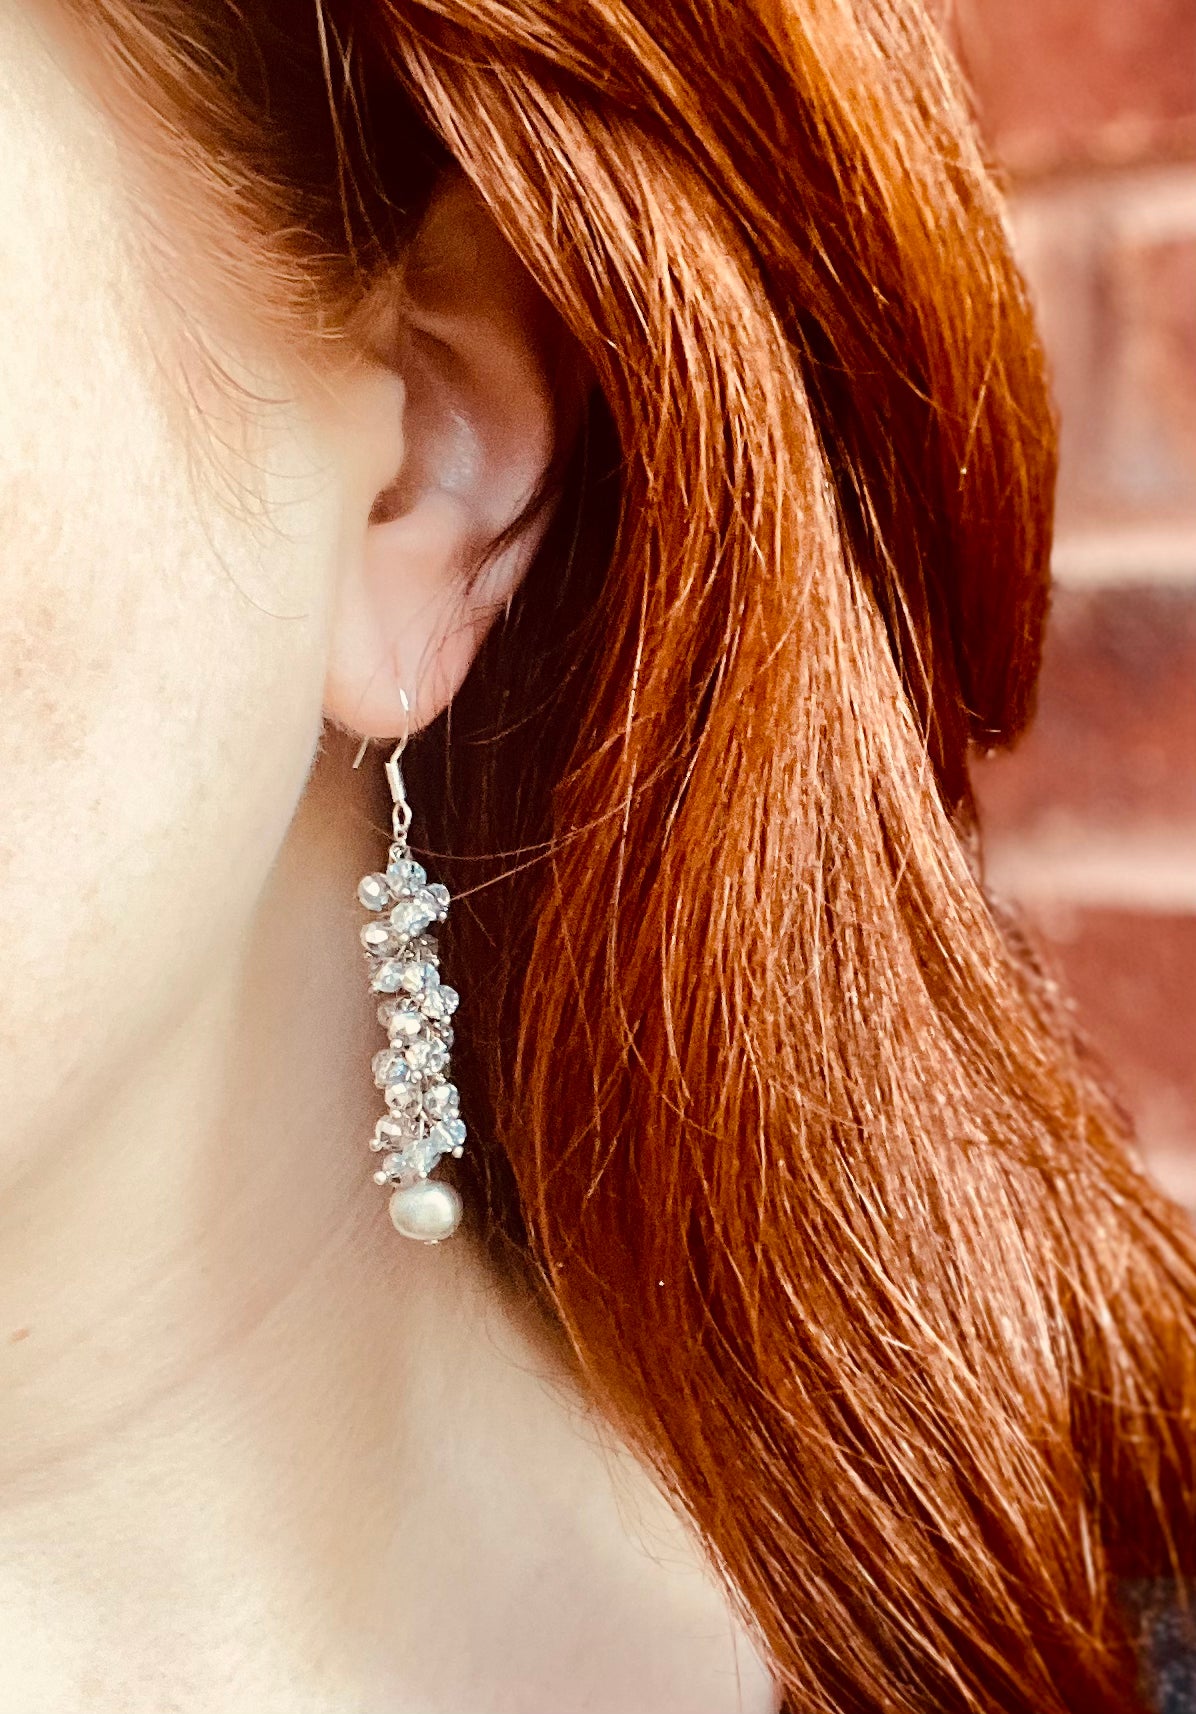 All dolled up! Cluster earrings